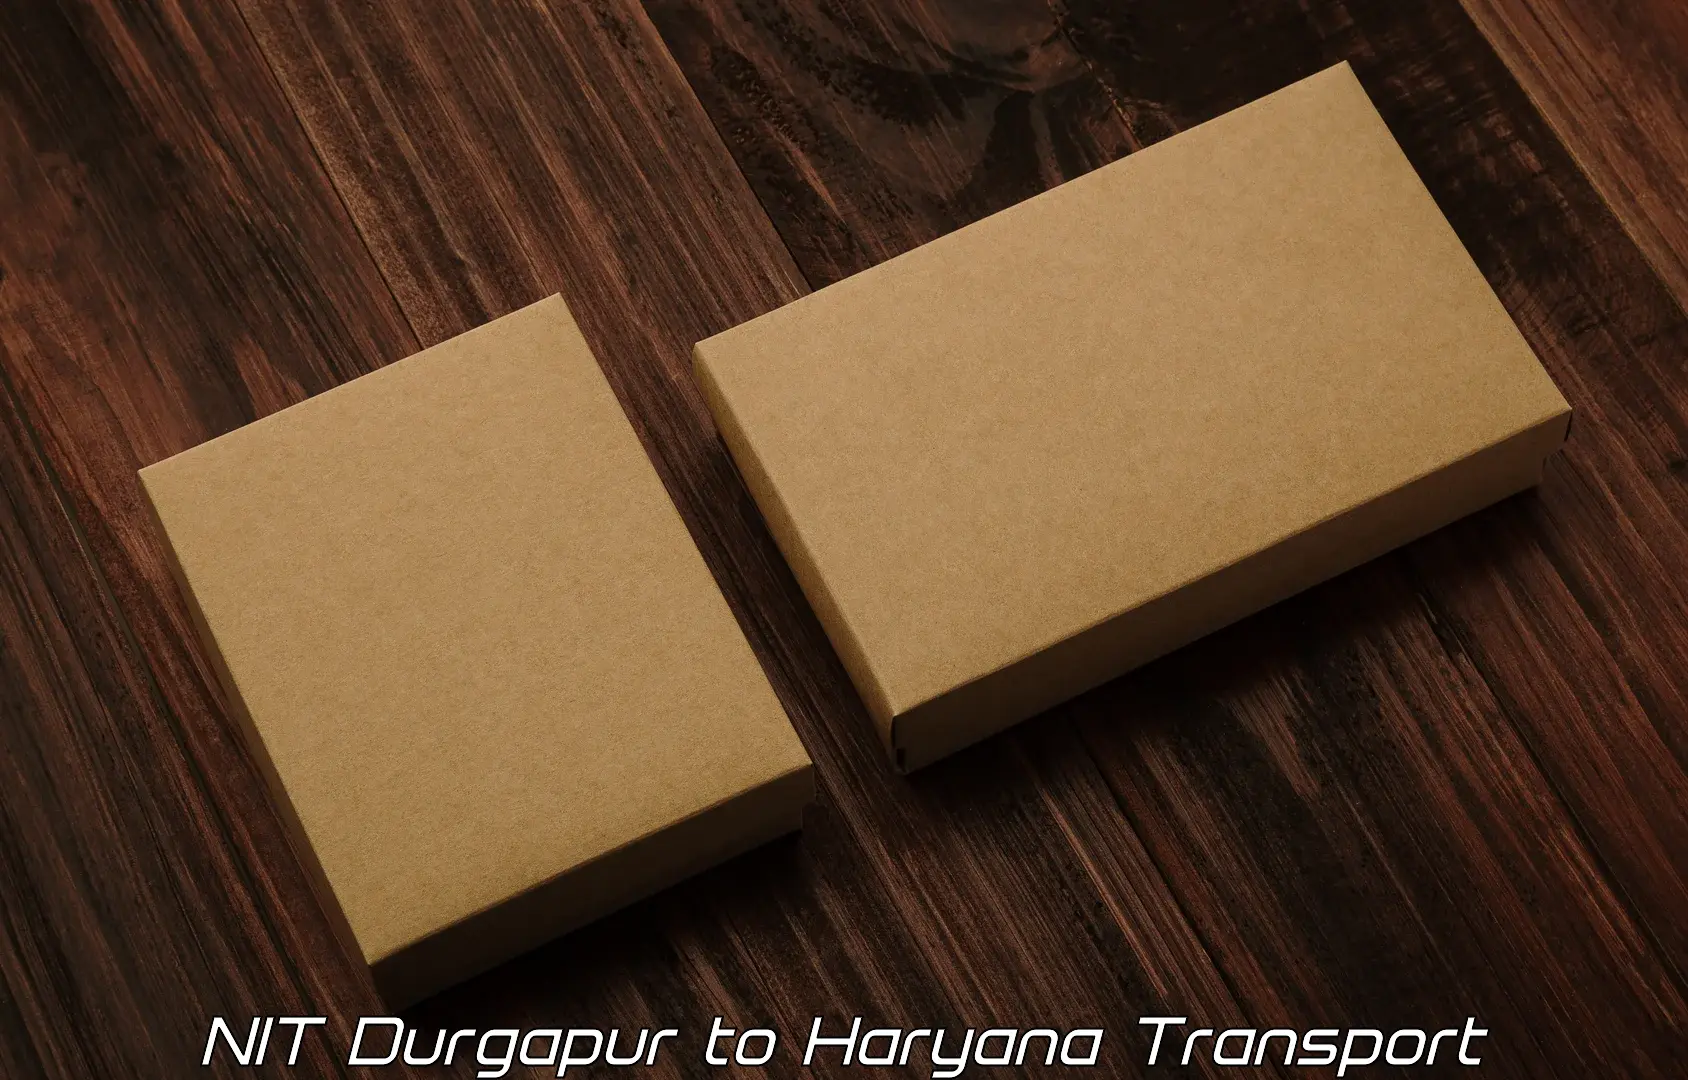 Truck transport companies in India NIT Durgapur to Panipat